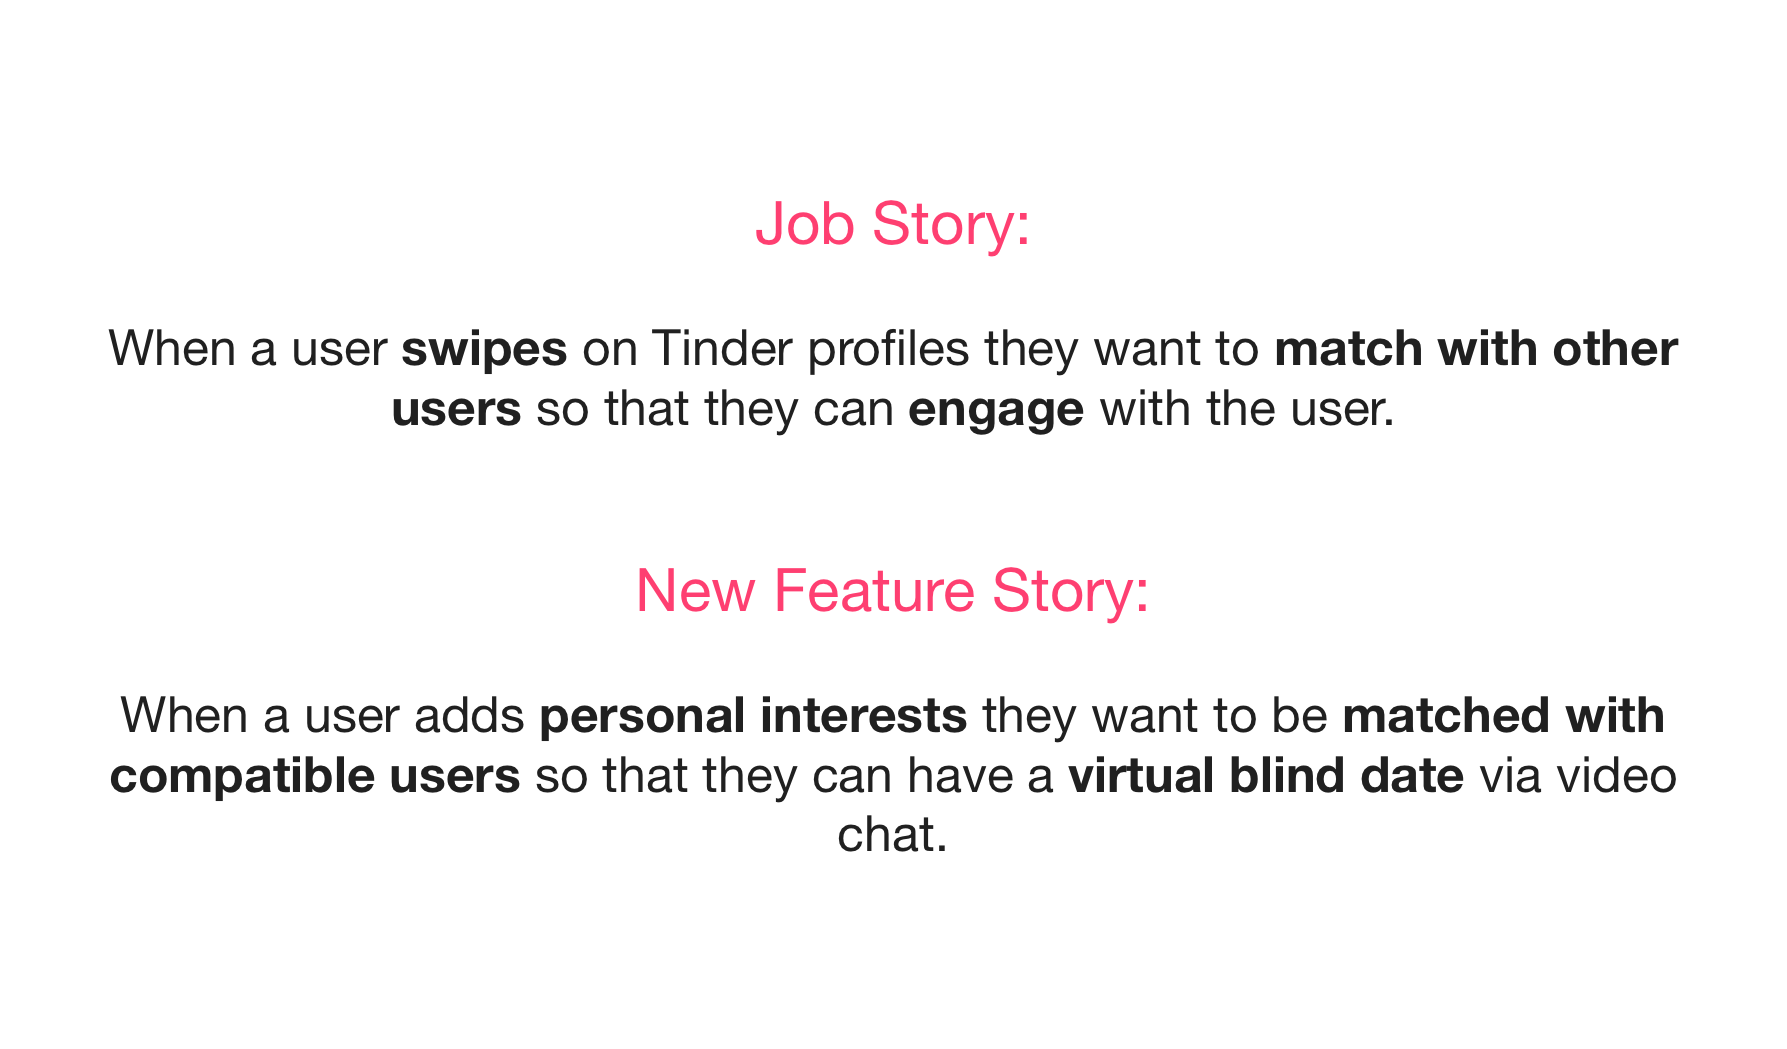 Tinder — Virtual Blind Date. Case Study — Add a Feature, by Maikel Millo